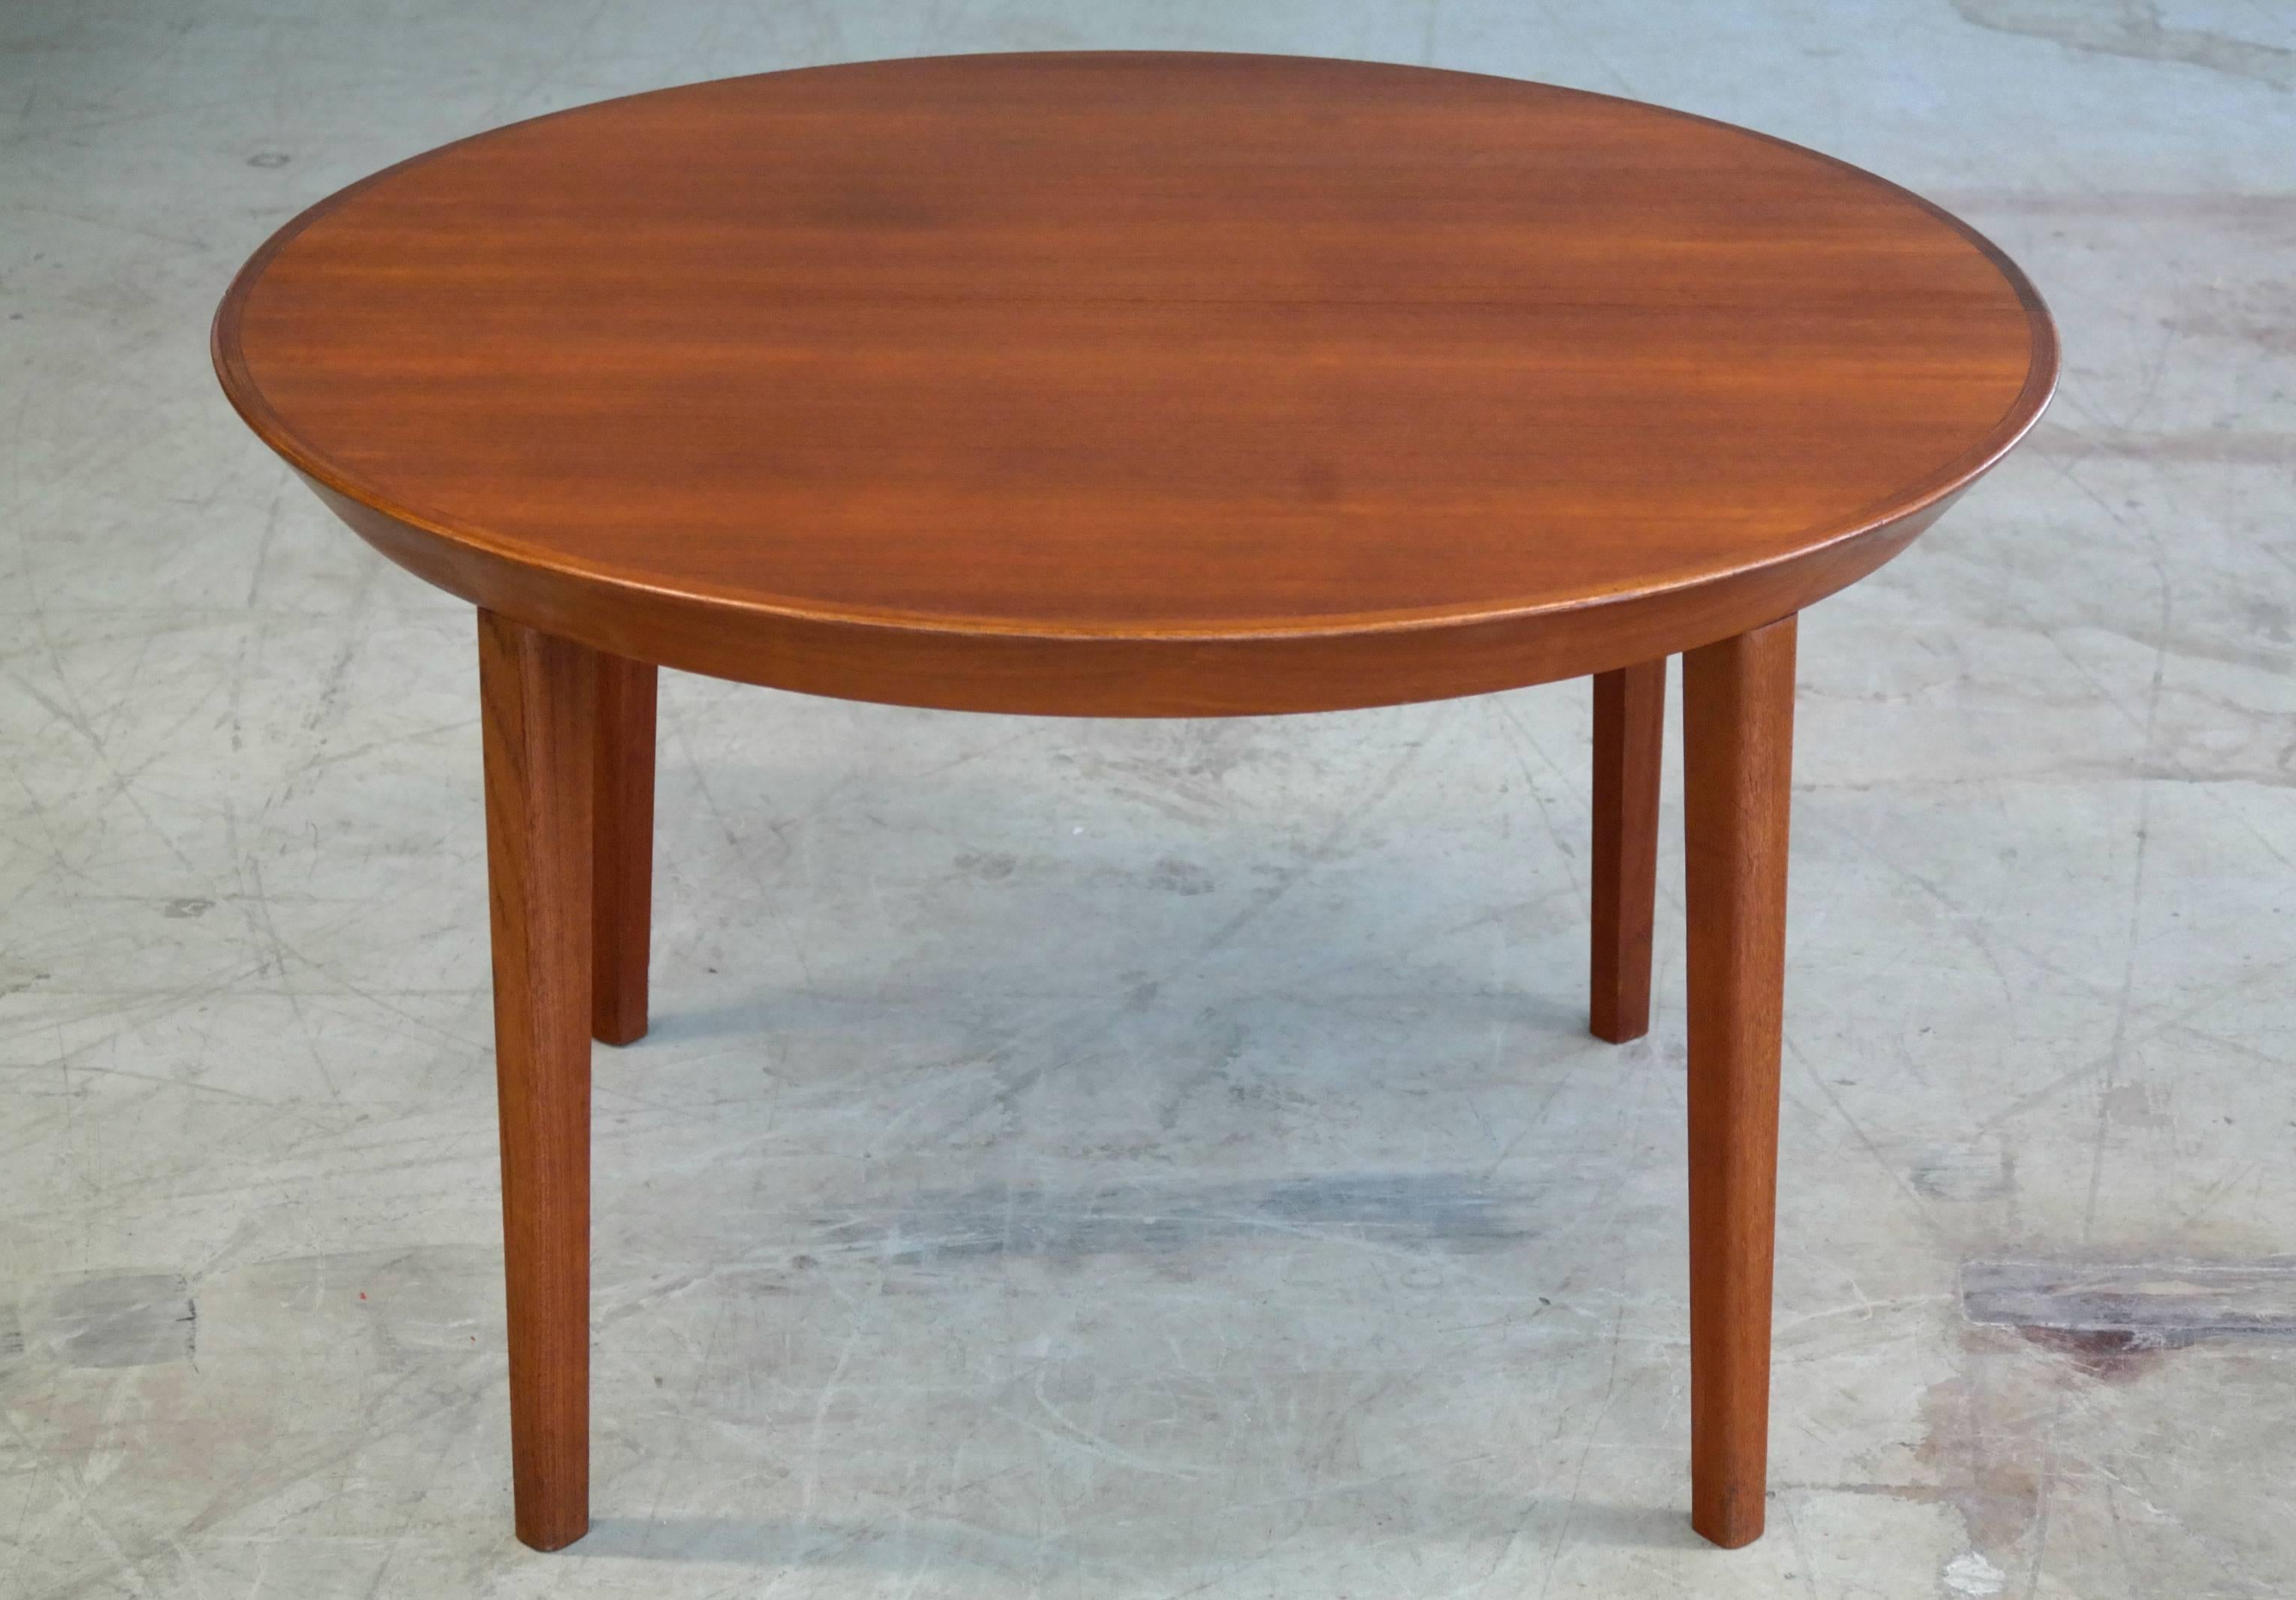 All restored very beautiful round dining table with beveled edges greatly designed by Ole Hald for Gudme Møbelfabrik. Superb quality and excellent condition.

Measures 48 inches in diameter with two extensions that together can make the table a